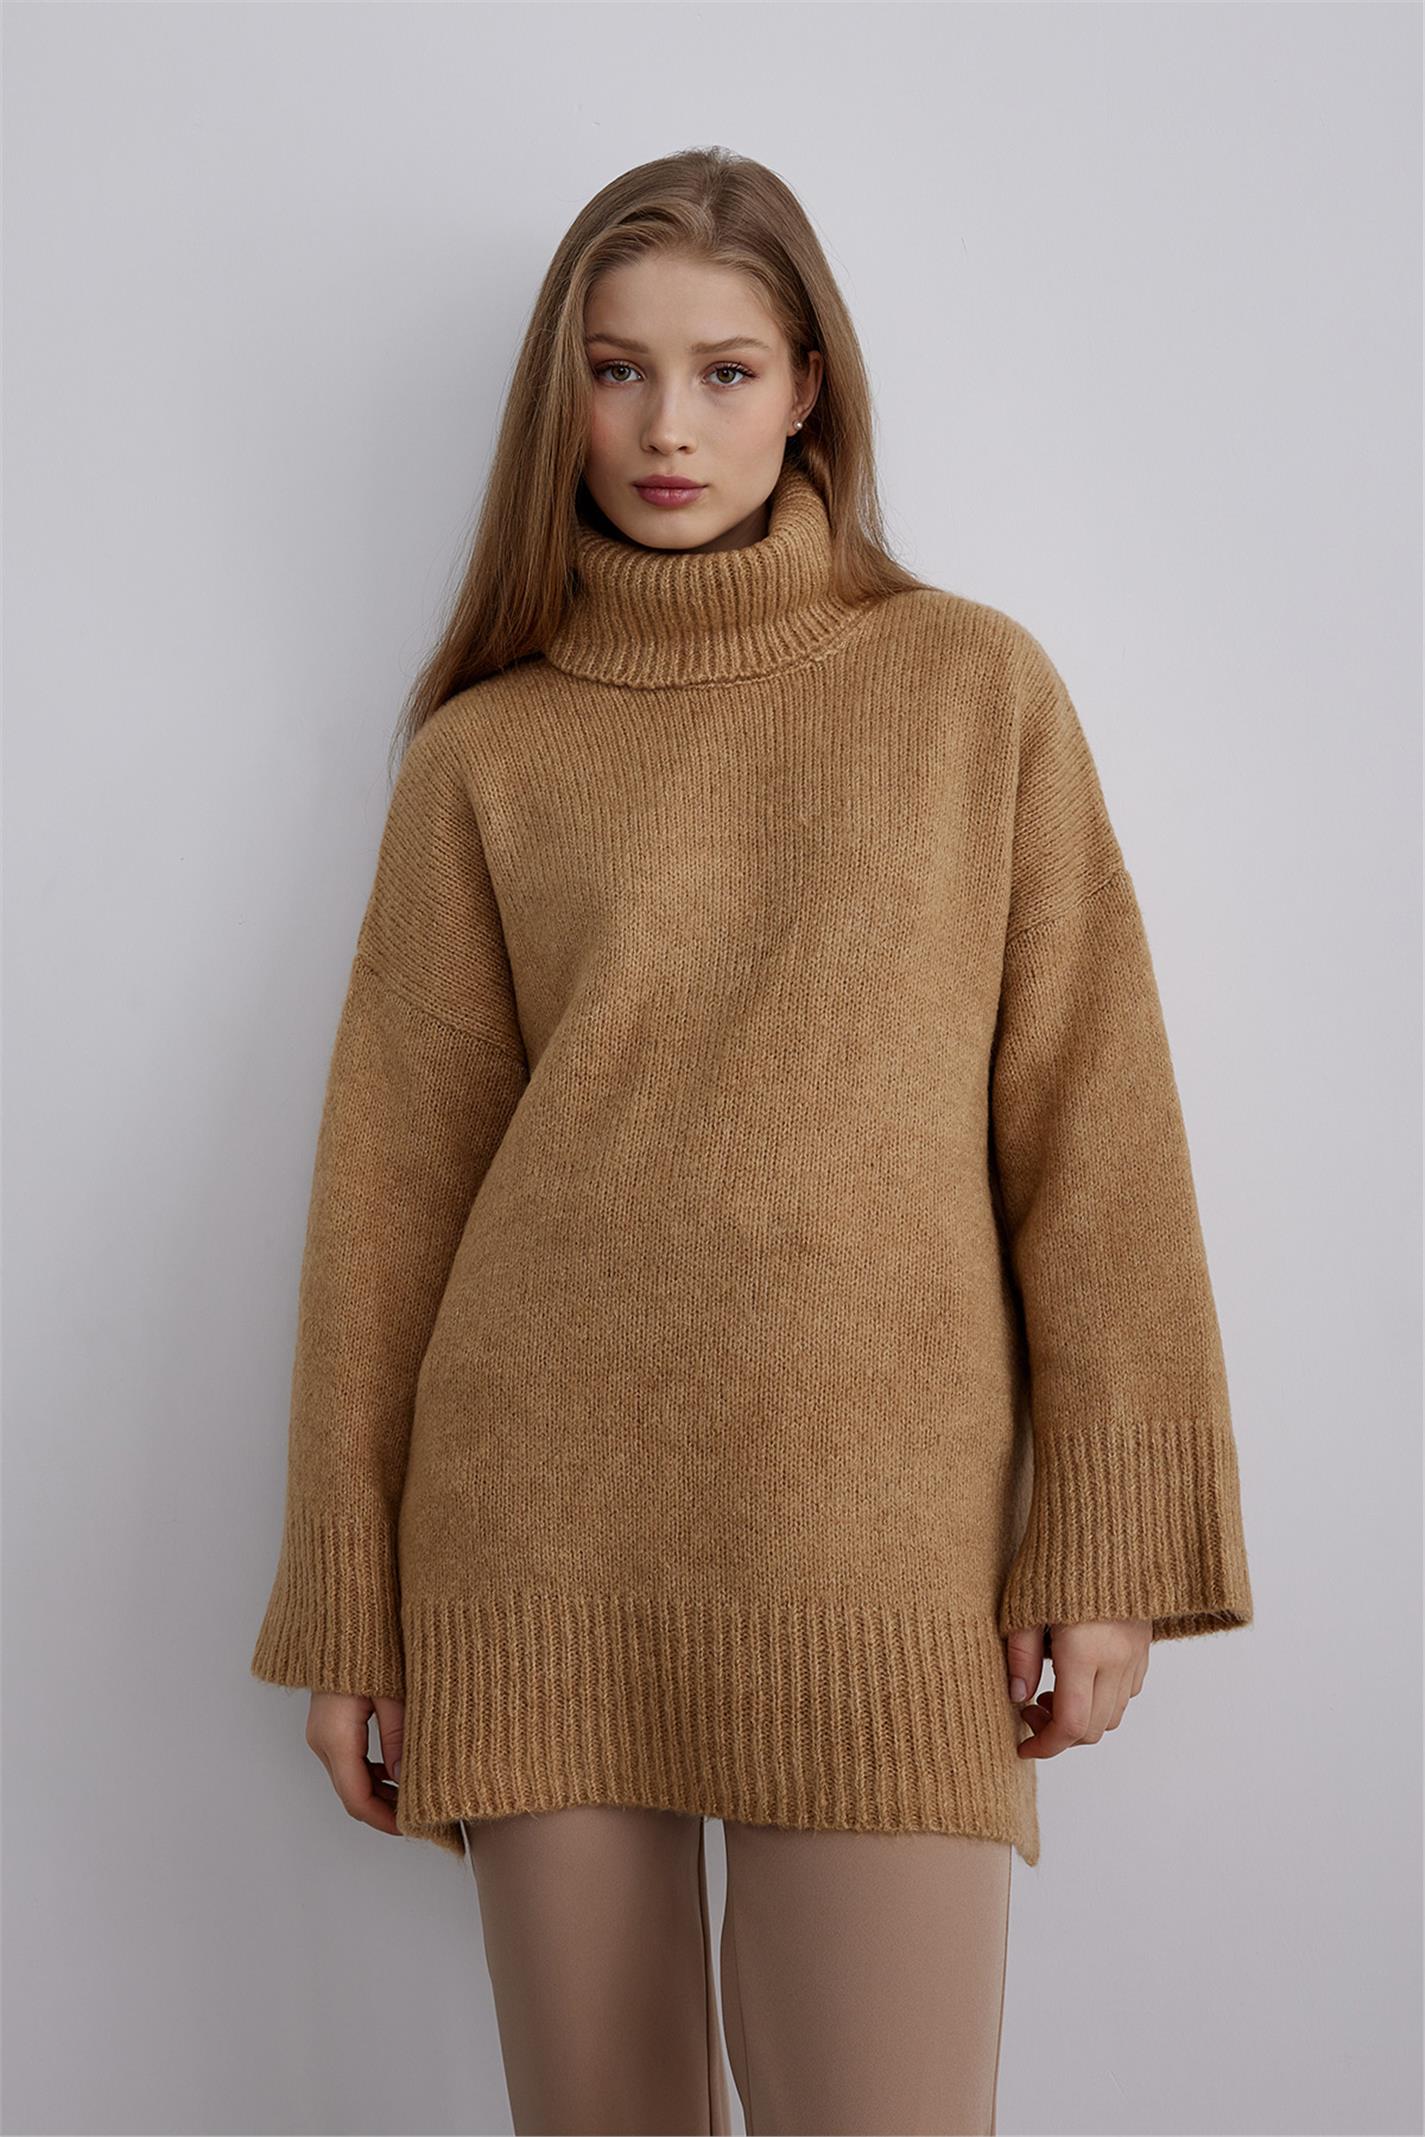 Saodimallsu Womens Oversized Turtleneck Fall Sweaters Batwing Long Sleeve  Cute Cozy Chunky Knit Pullover Jumper Tops Apricot at  Women's  Clothing store